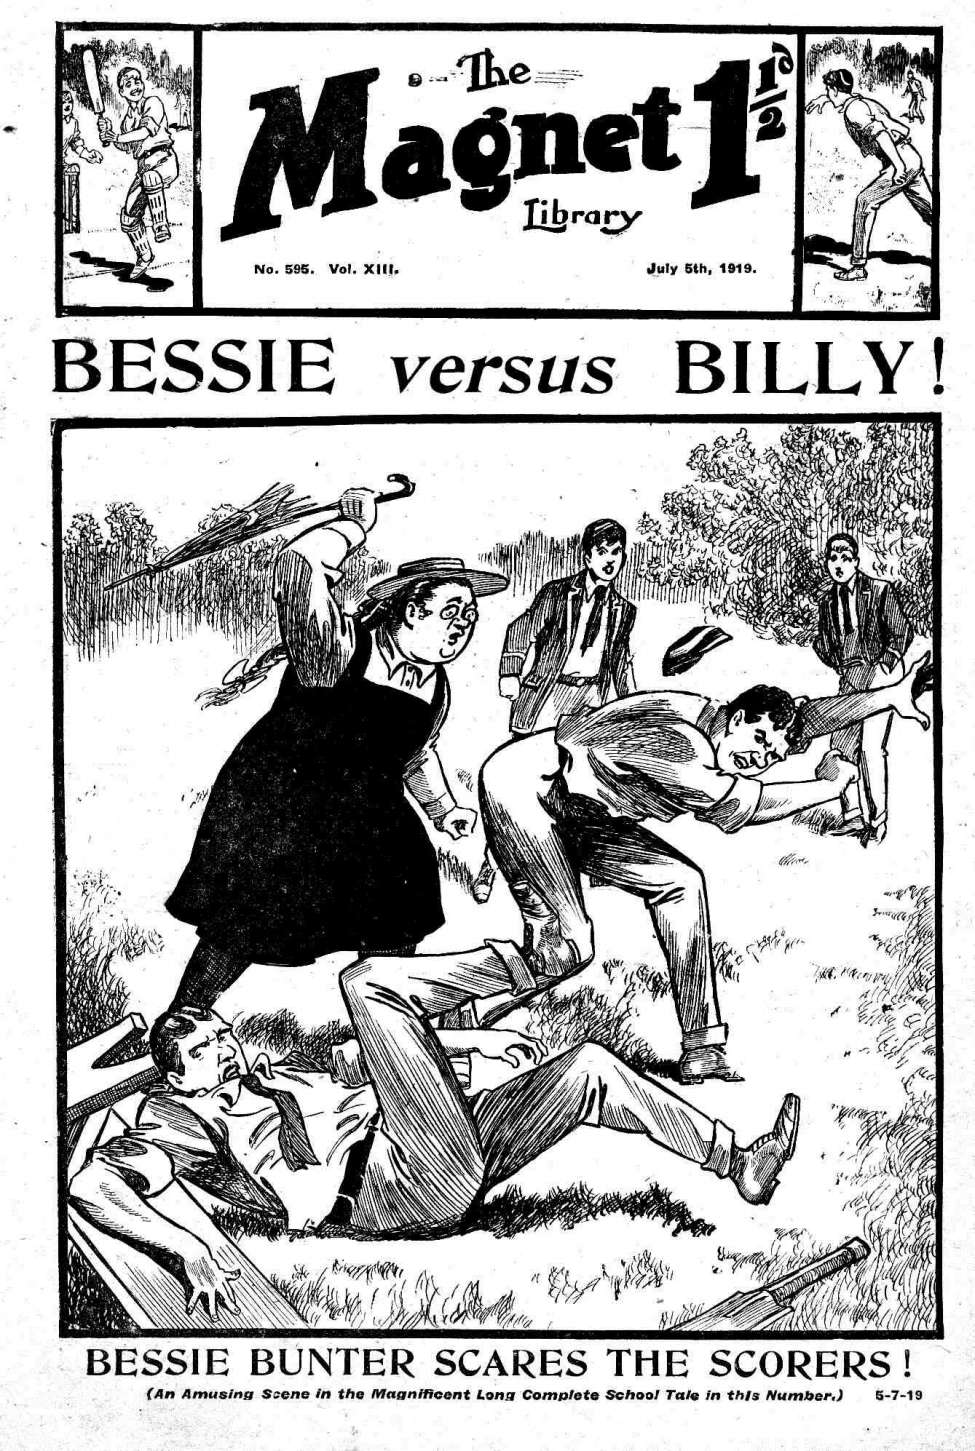 Book Cover For The Magnet 595 - Bessie versus Billy